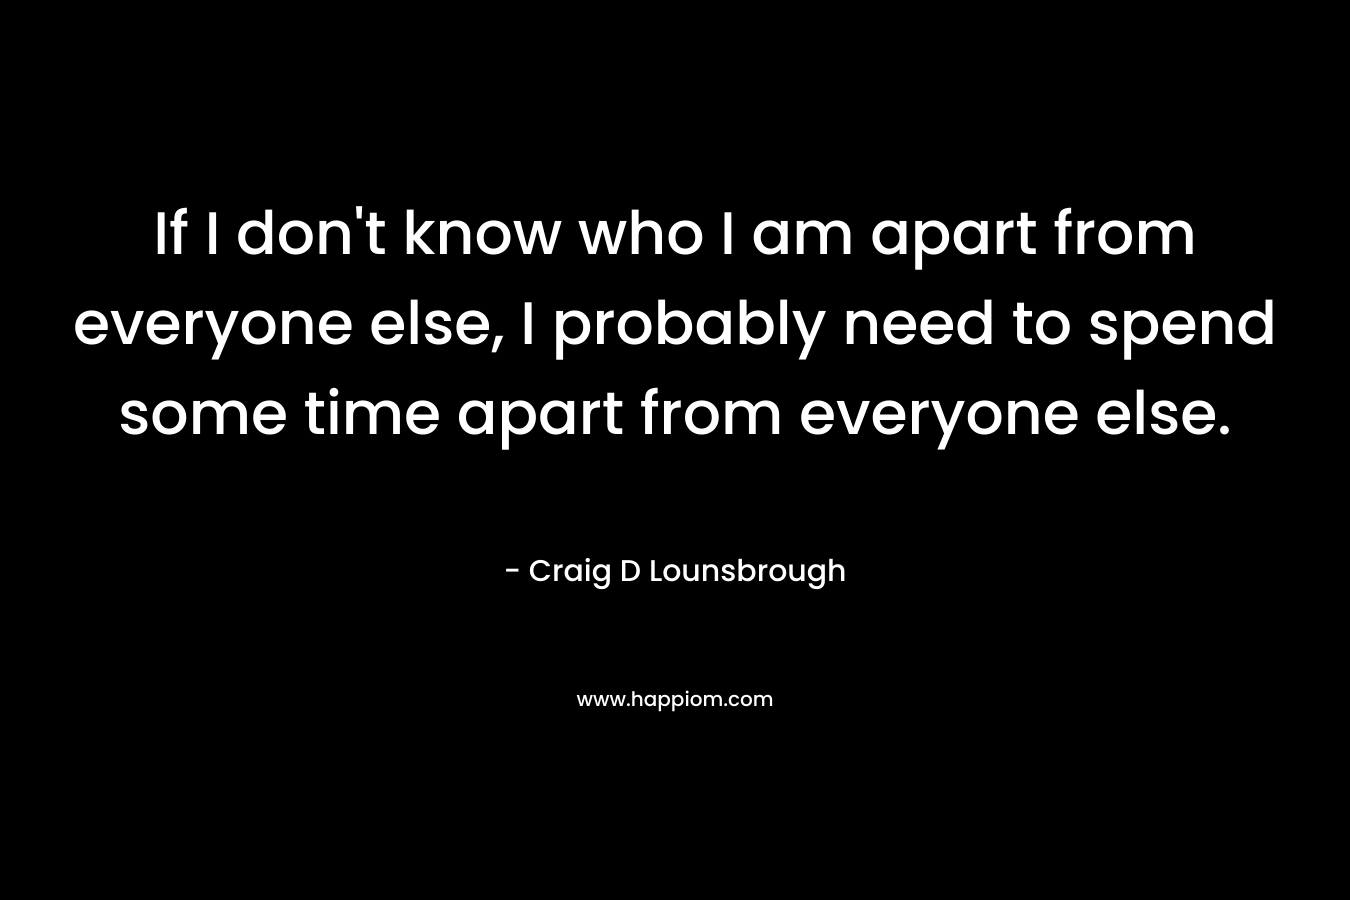 If I don't know who I am apart from everyone else, I probably need to spend some time apart from everyone else.